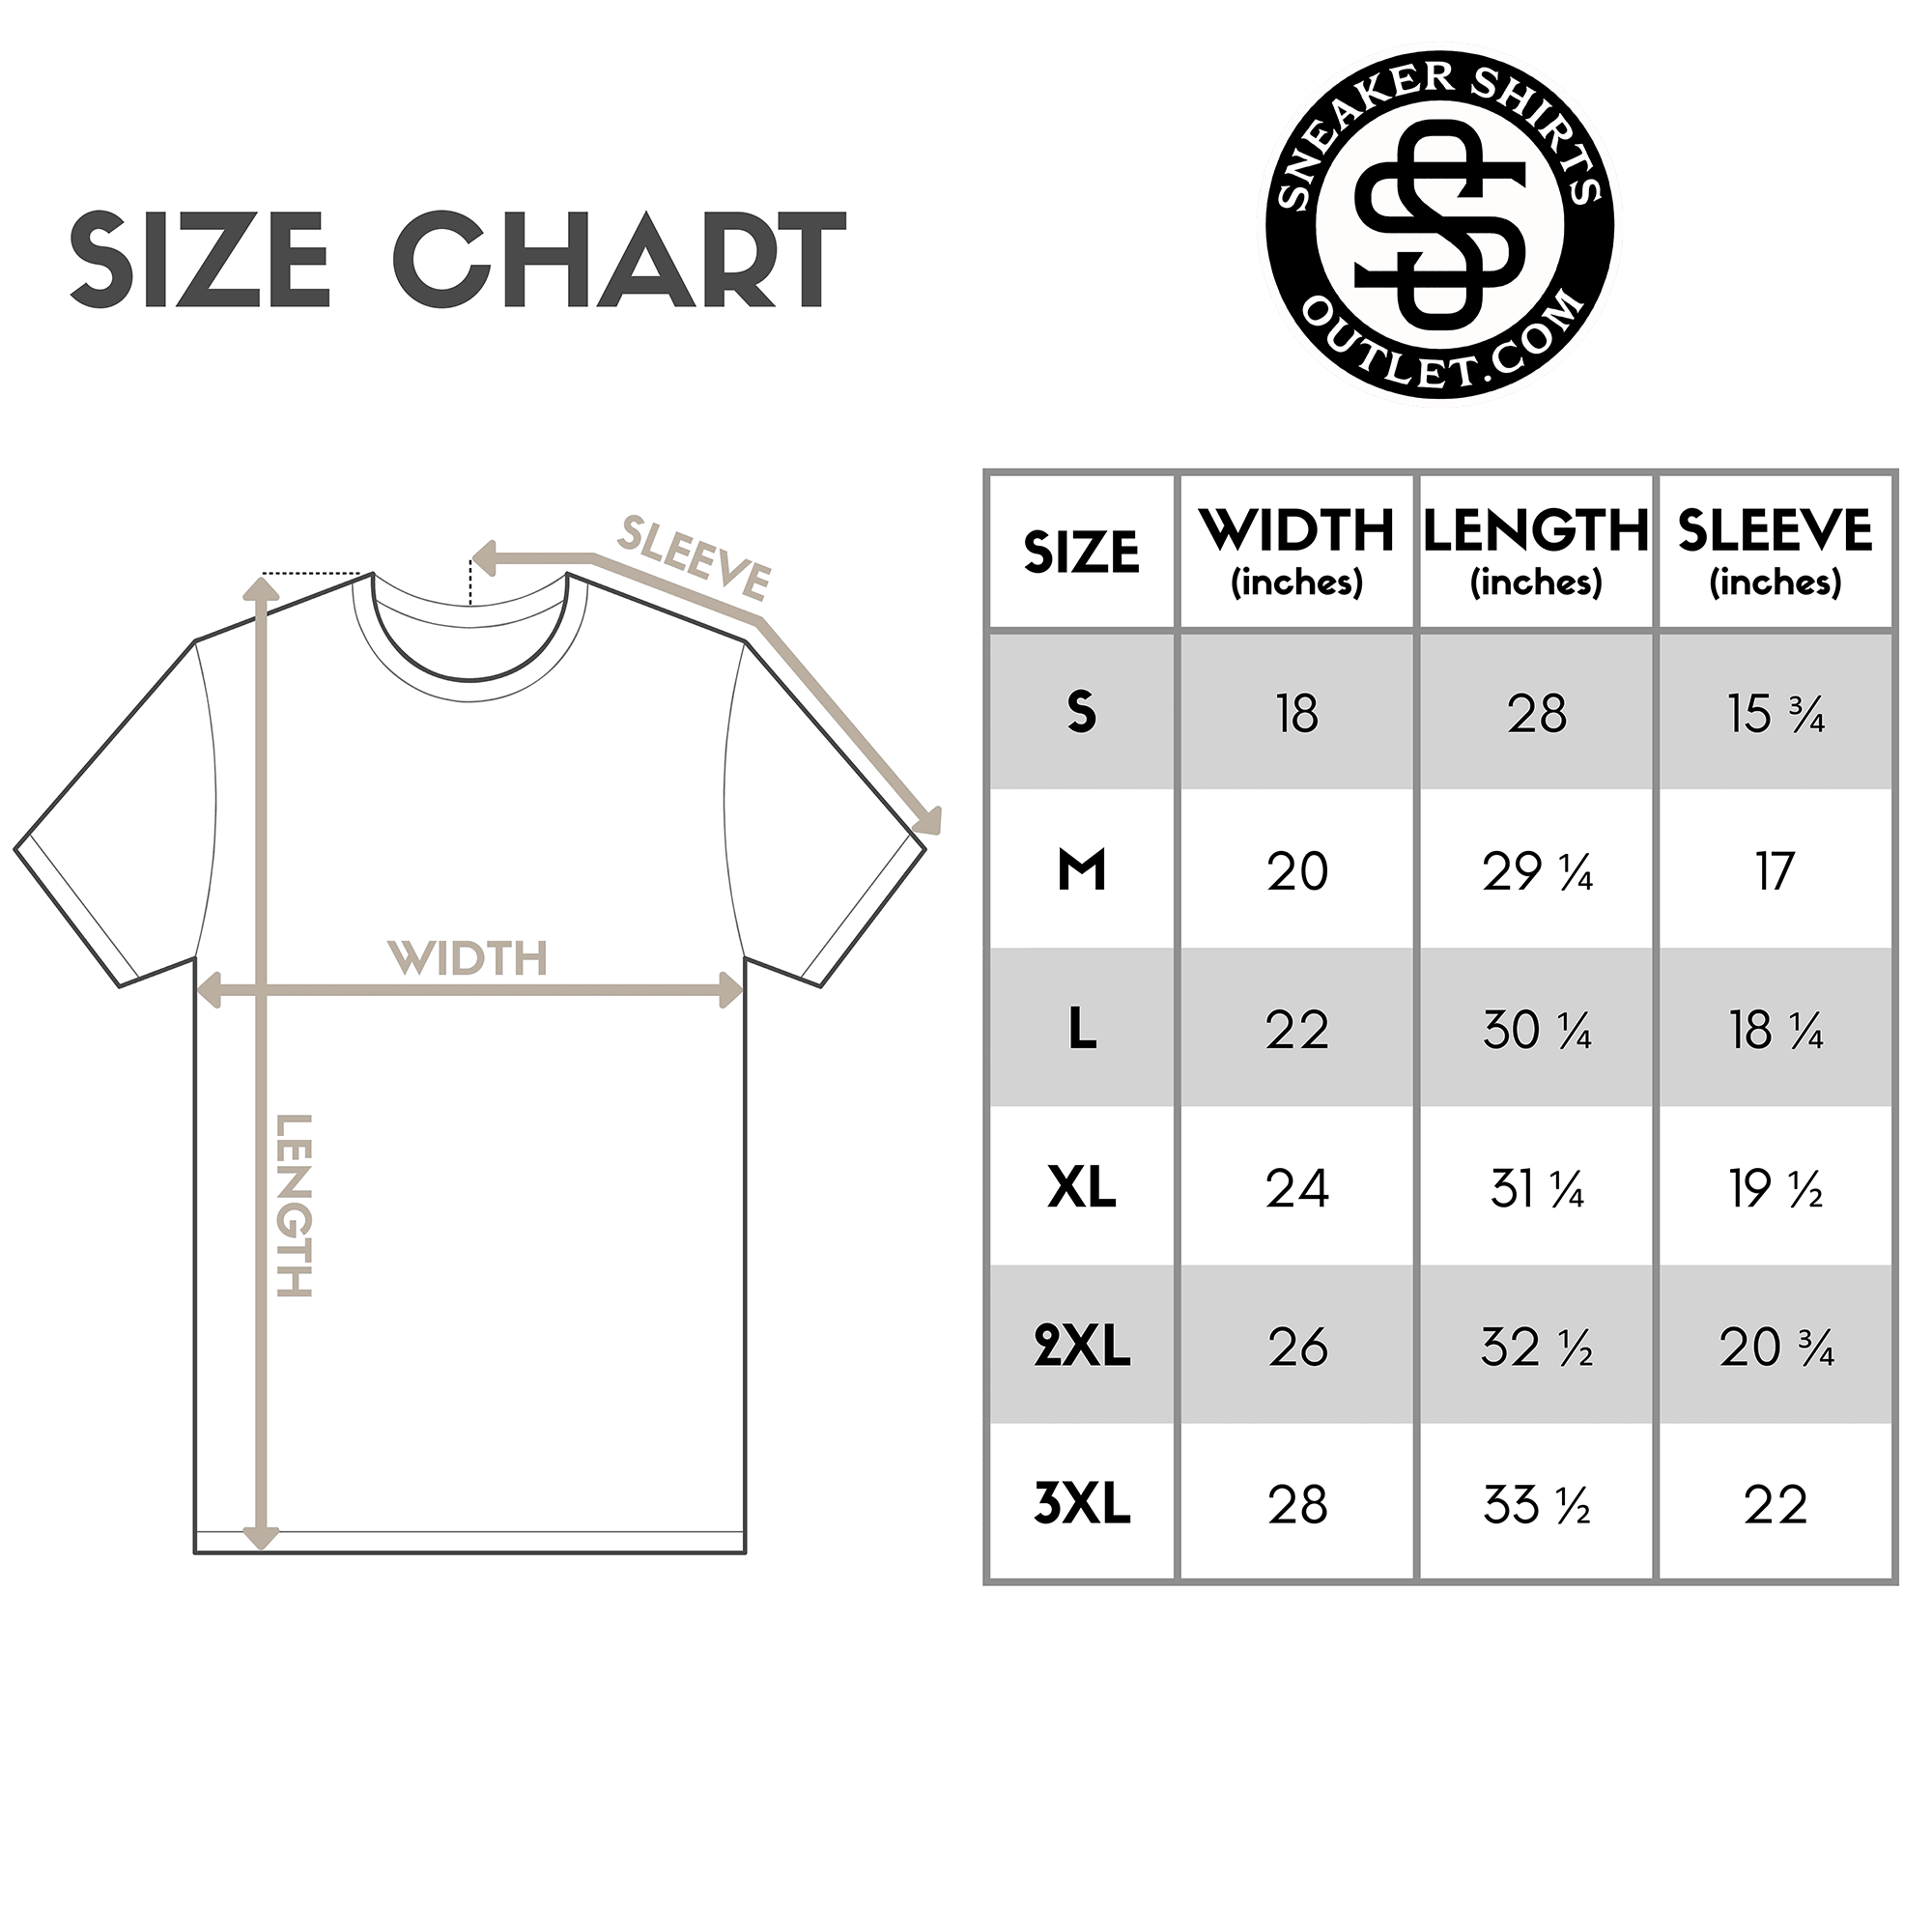 size chart Success Nutrition Shirt Nike Air Foamposite One Blud Void Rugged Orange photo